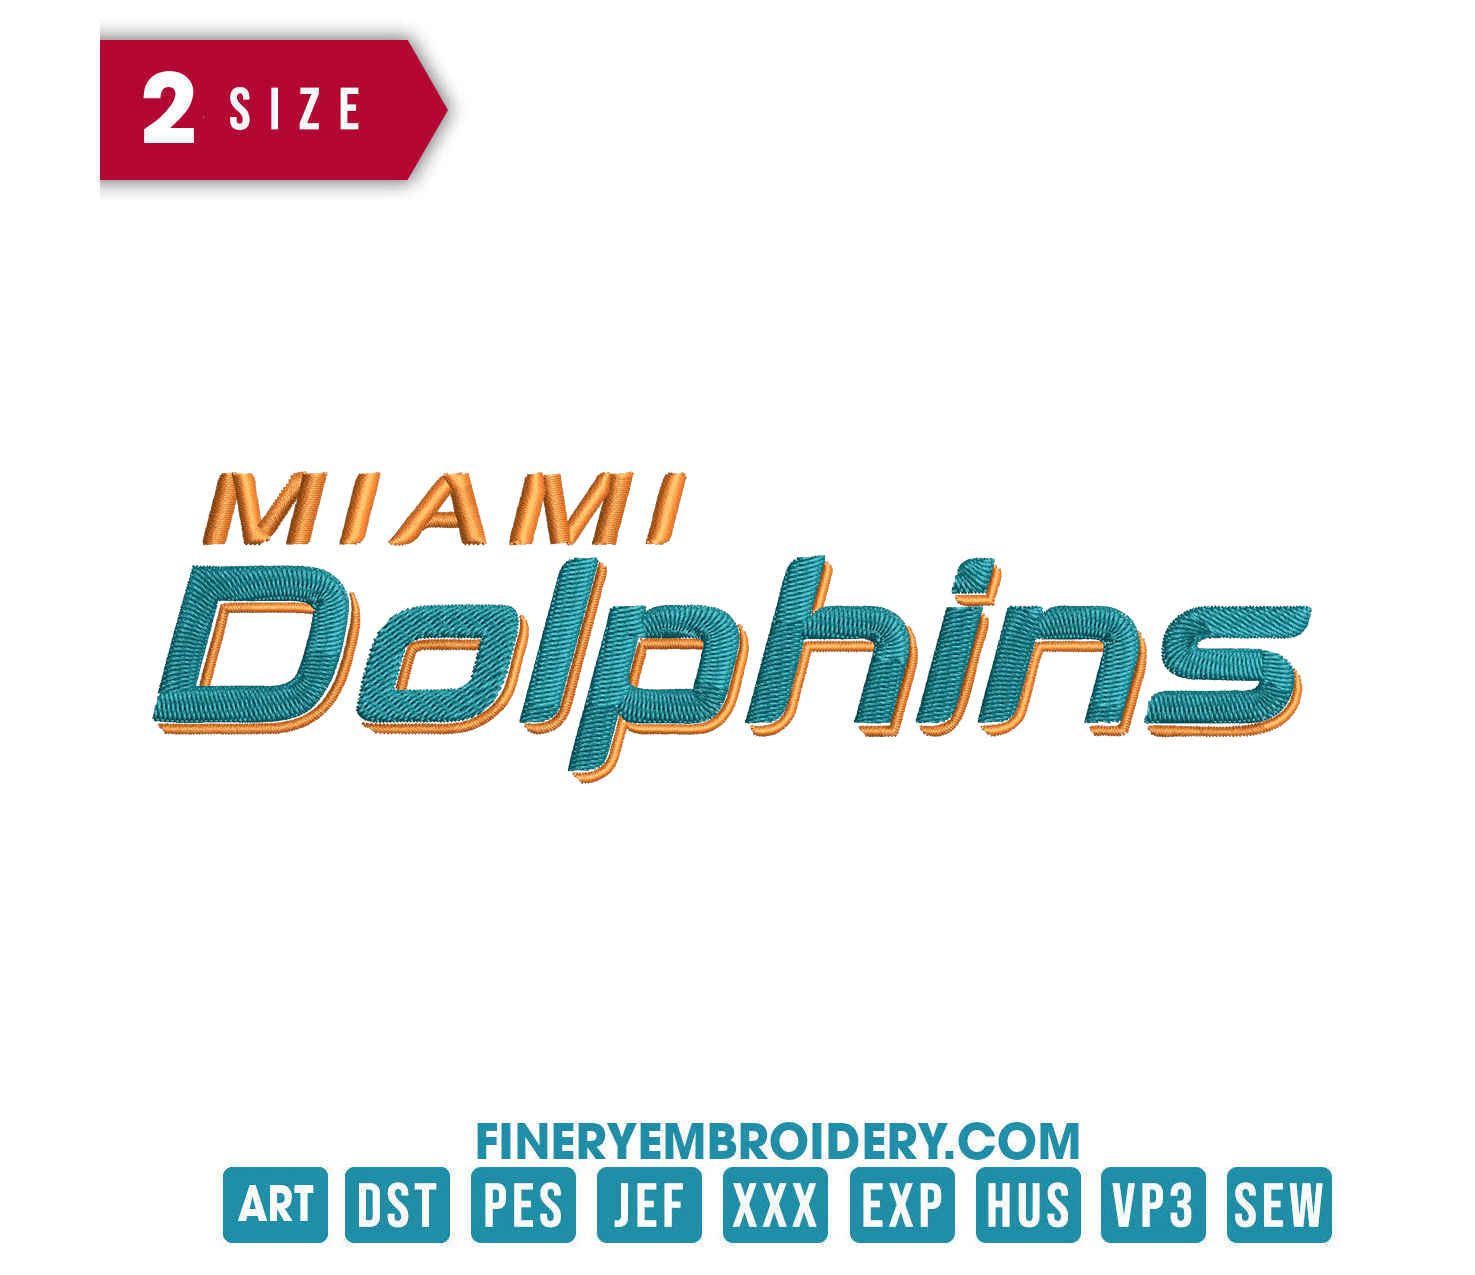 Miami Dolphins 7 : Embroidery Design - FineryEmbroidery